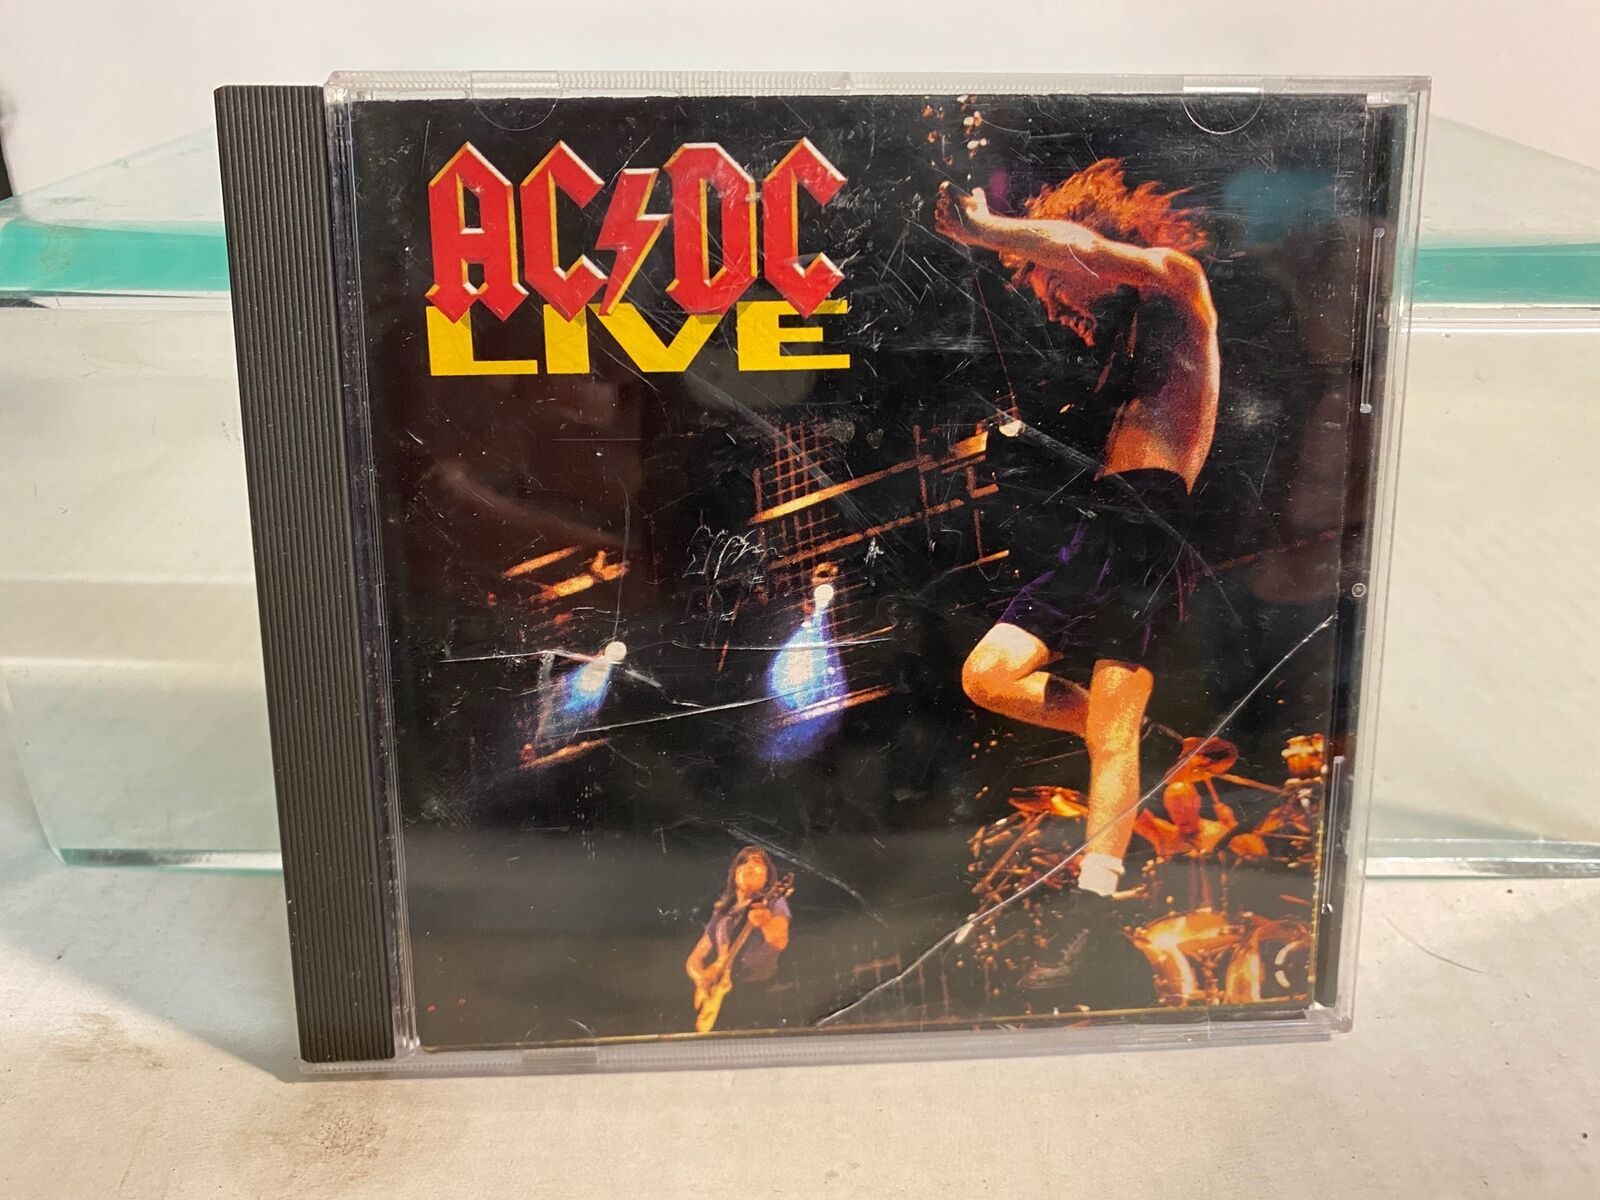 Primary image for AC/DC : Live (CD Atco Records, 1992, 14 Tracks) Preowned BMG Club Issue